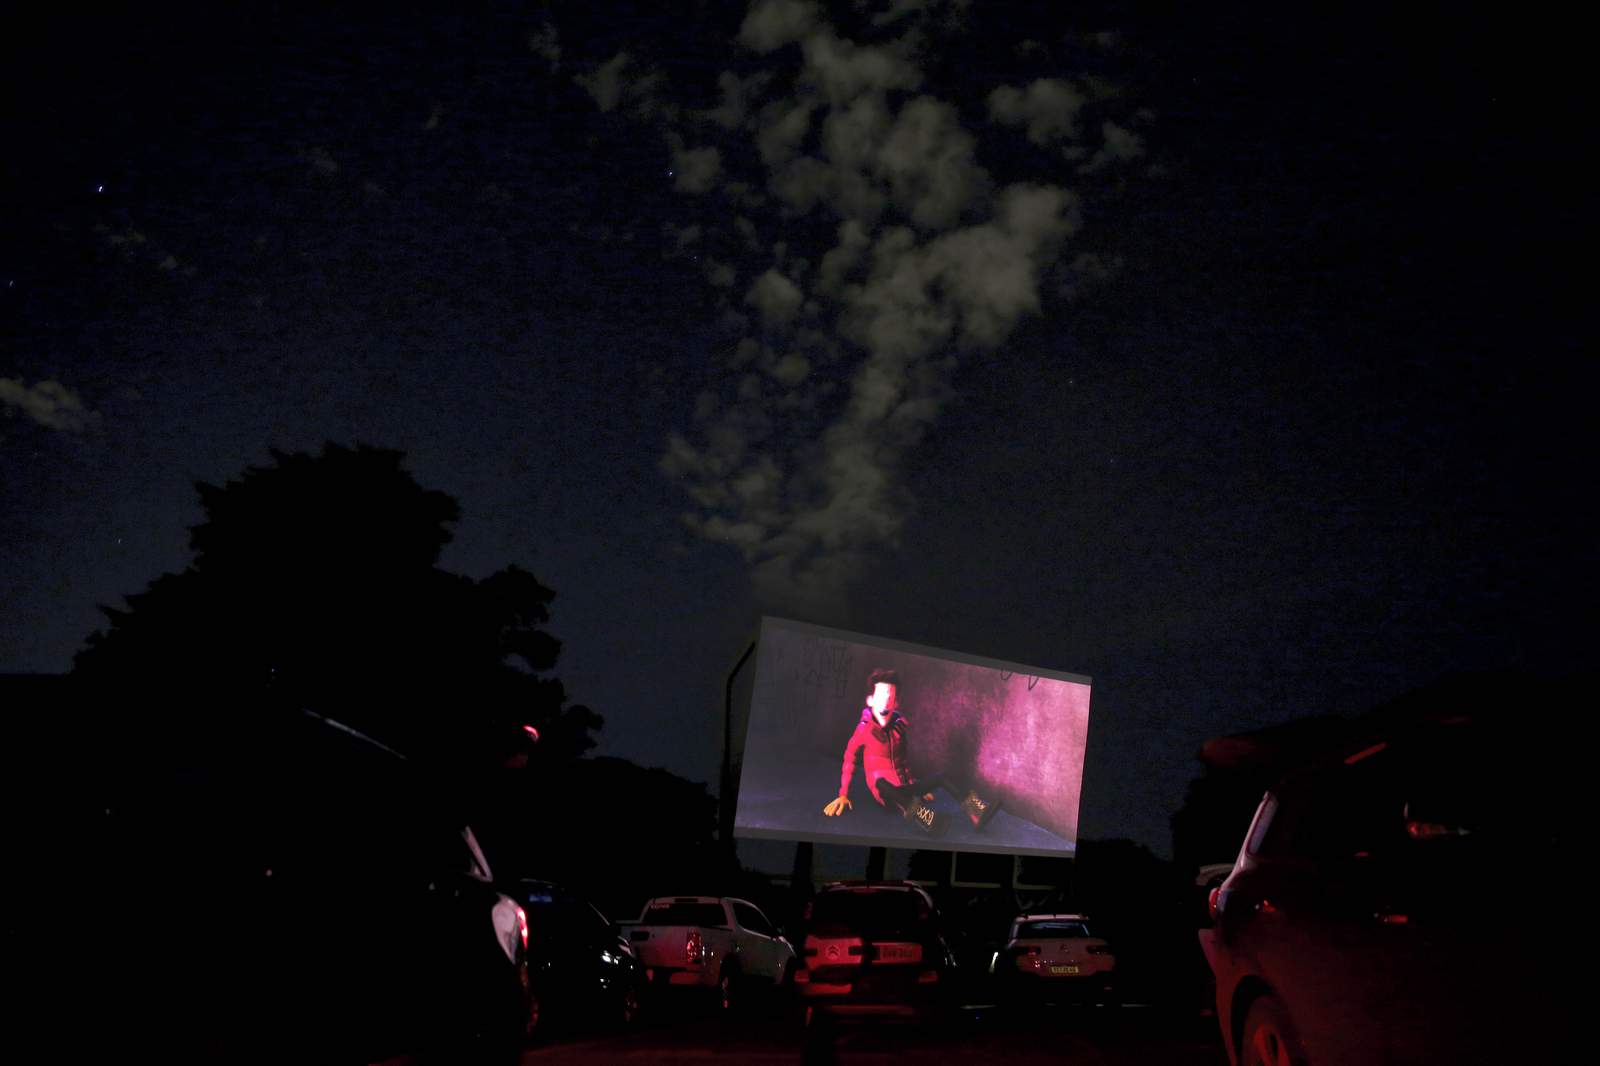 City of St. Cloud invites families to free drive-in movie